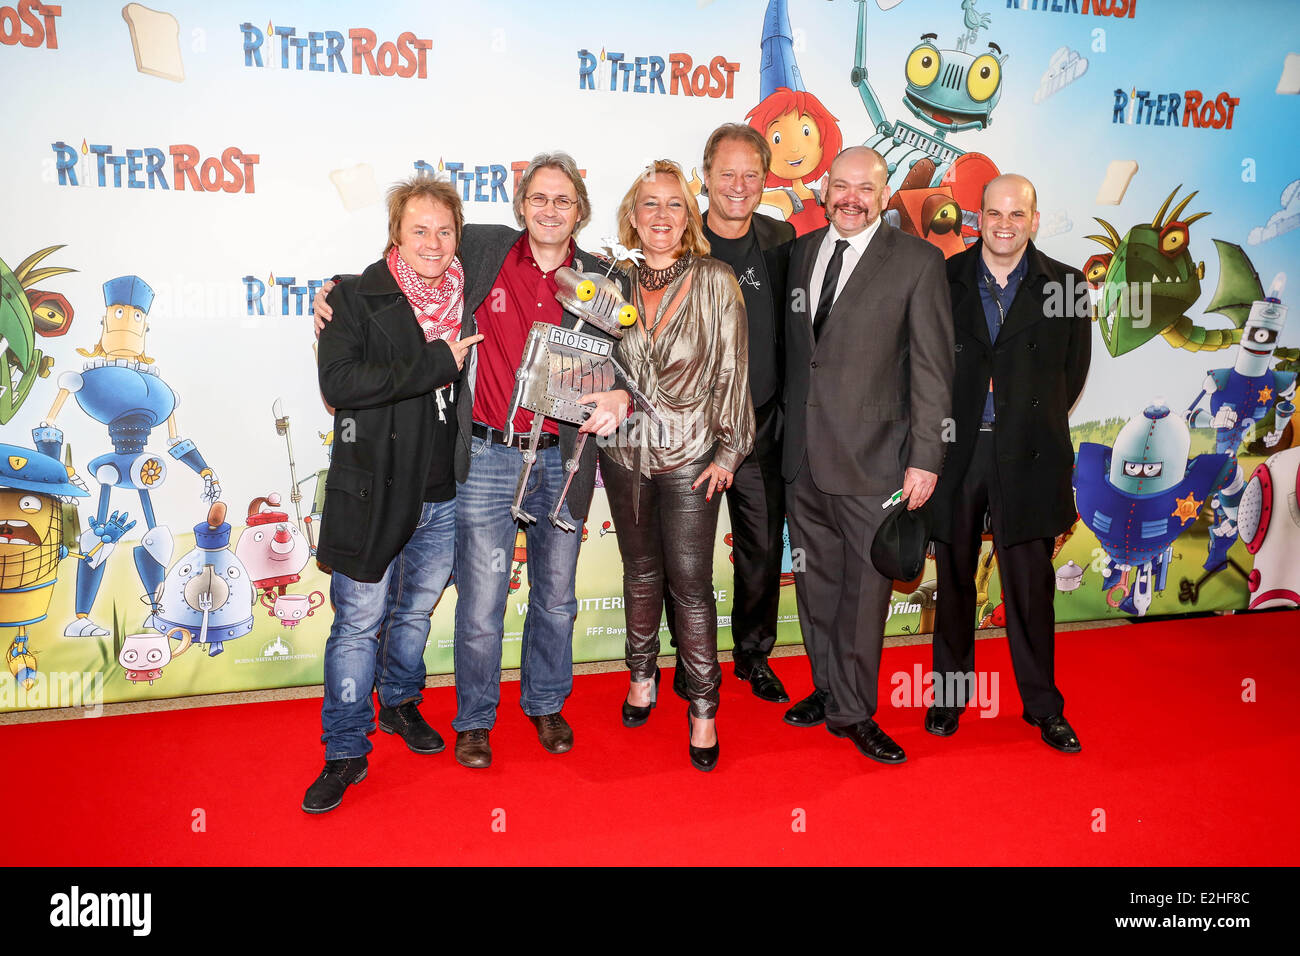 Dustin Semmelrogge and Jörg Hilbert and Gabriele M. Walther and Tom Gerhardt and Mark Slater and guest at 'Ritter Rost' premiere at Mathäser movie theater.  Where: Munich, Germany When: 06 Jan 2013 Stock Photo